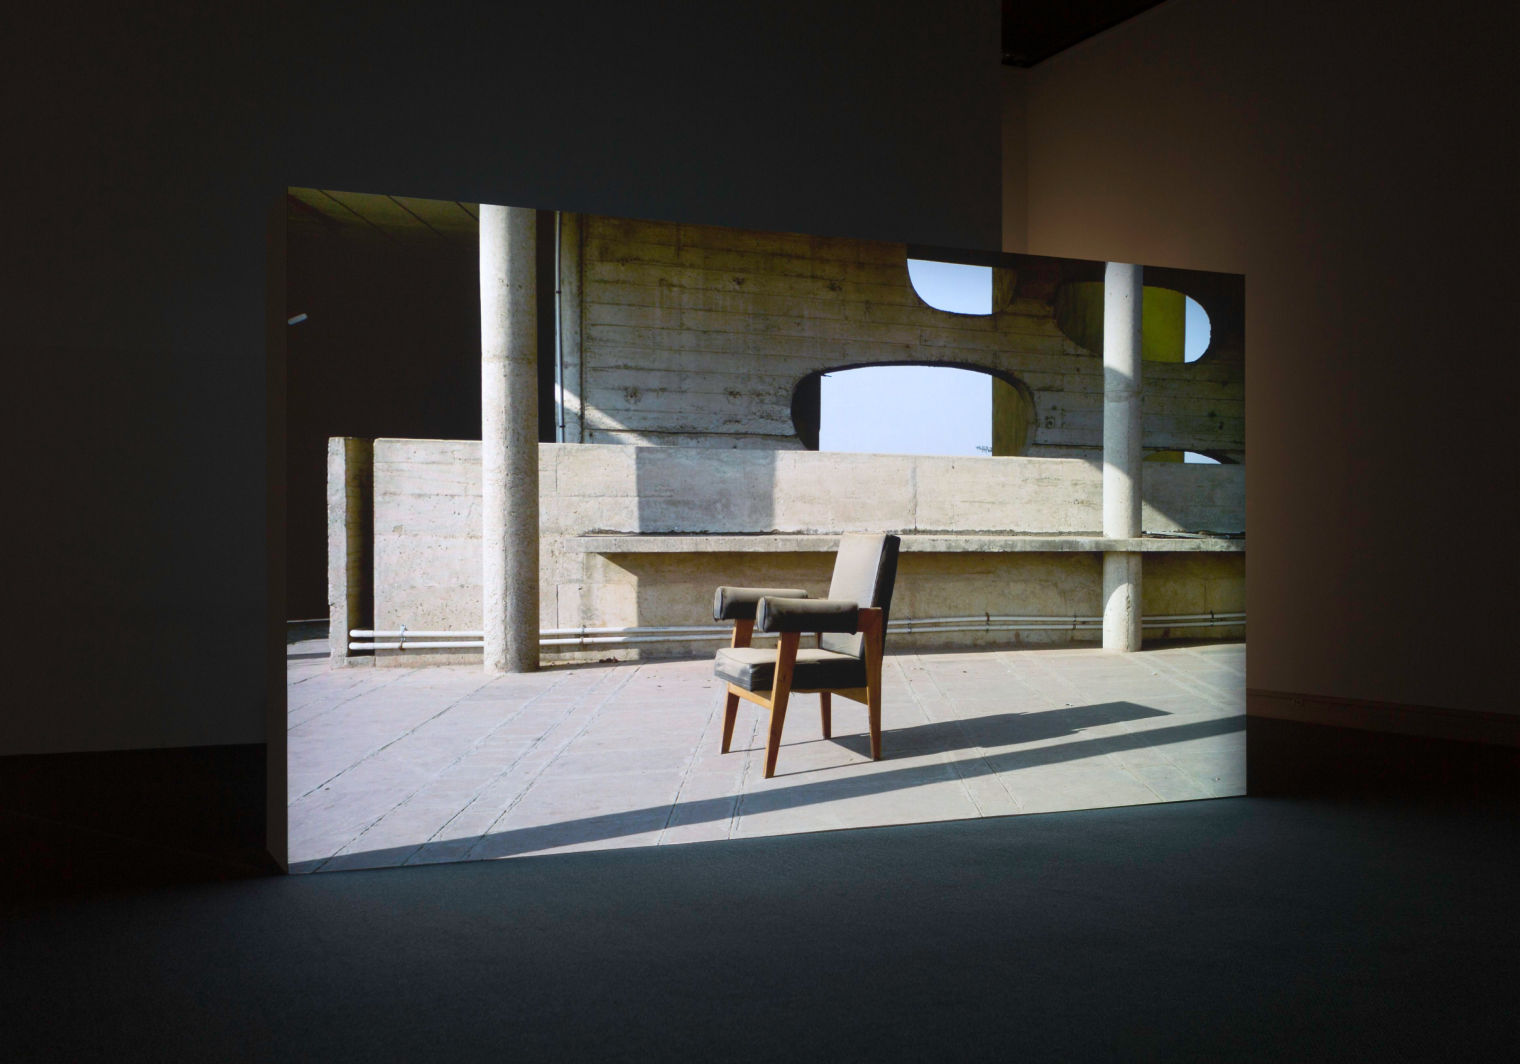 Gallery view of a screen showing a teak chair with gray cushions and armrests in an empty urban setting. 